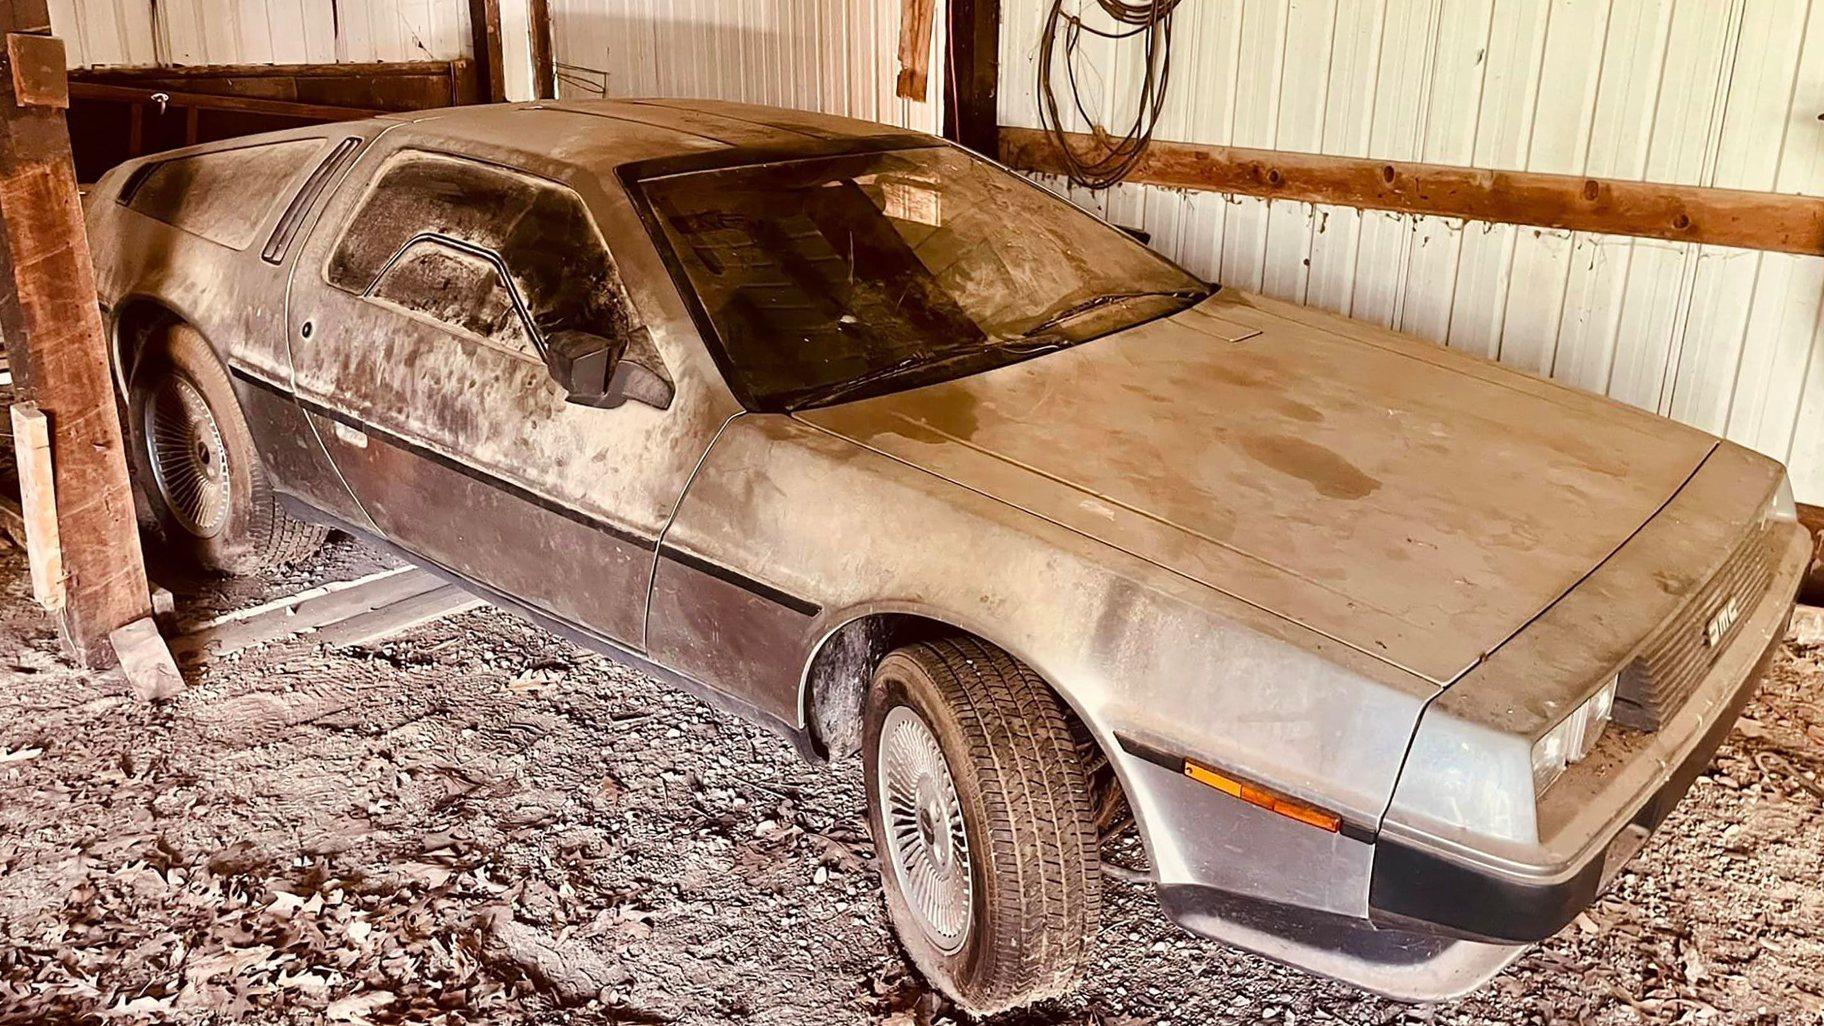 A 1981 DeLorean with only 977 miles on its odometer was found in a barn in Wisconsin. (Mike McElhattan)